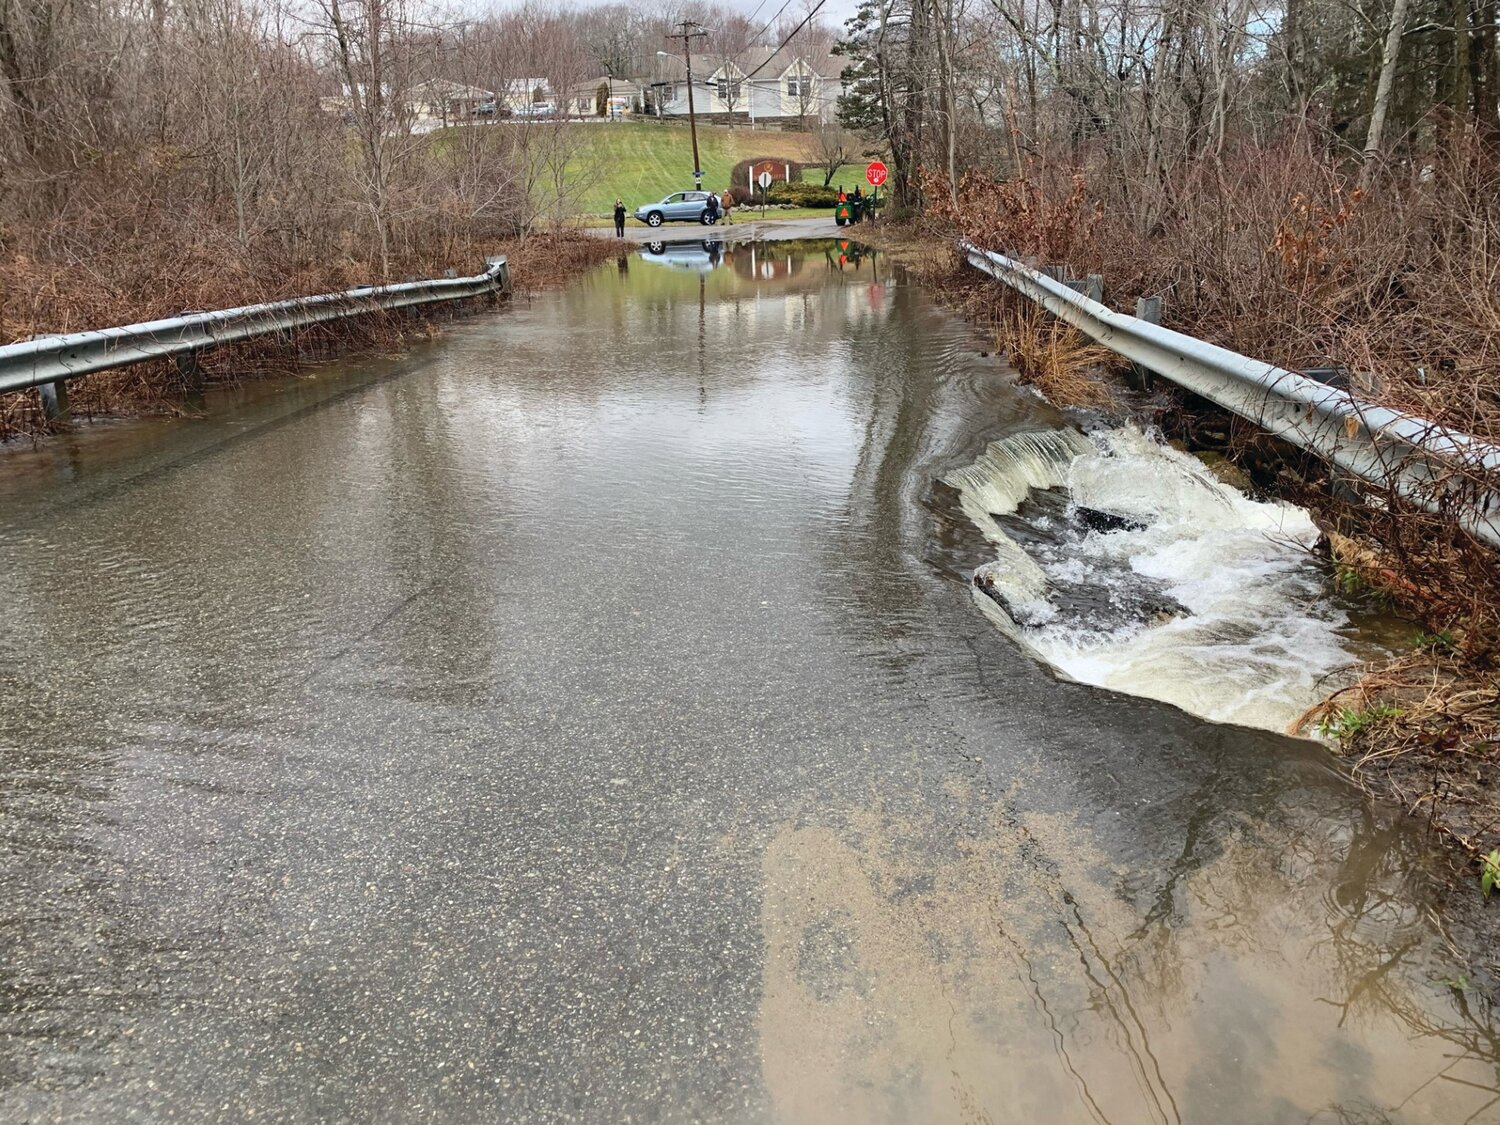 ROADS SUBMERGED: Early Wednesday morning, Jan. 10, Mayor Joseph M. Polisena Jr. took this photo from “Old Pocasset at Briarcliffe.” According to the mayor, “There’s also large-scale residential flooding throughout Johnston.”